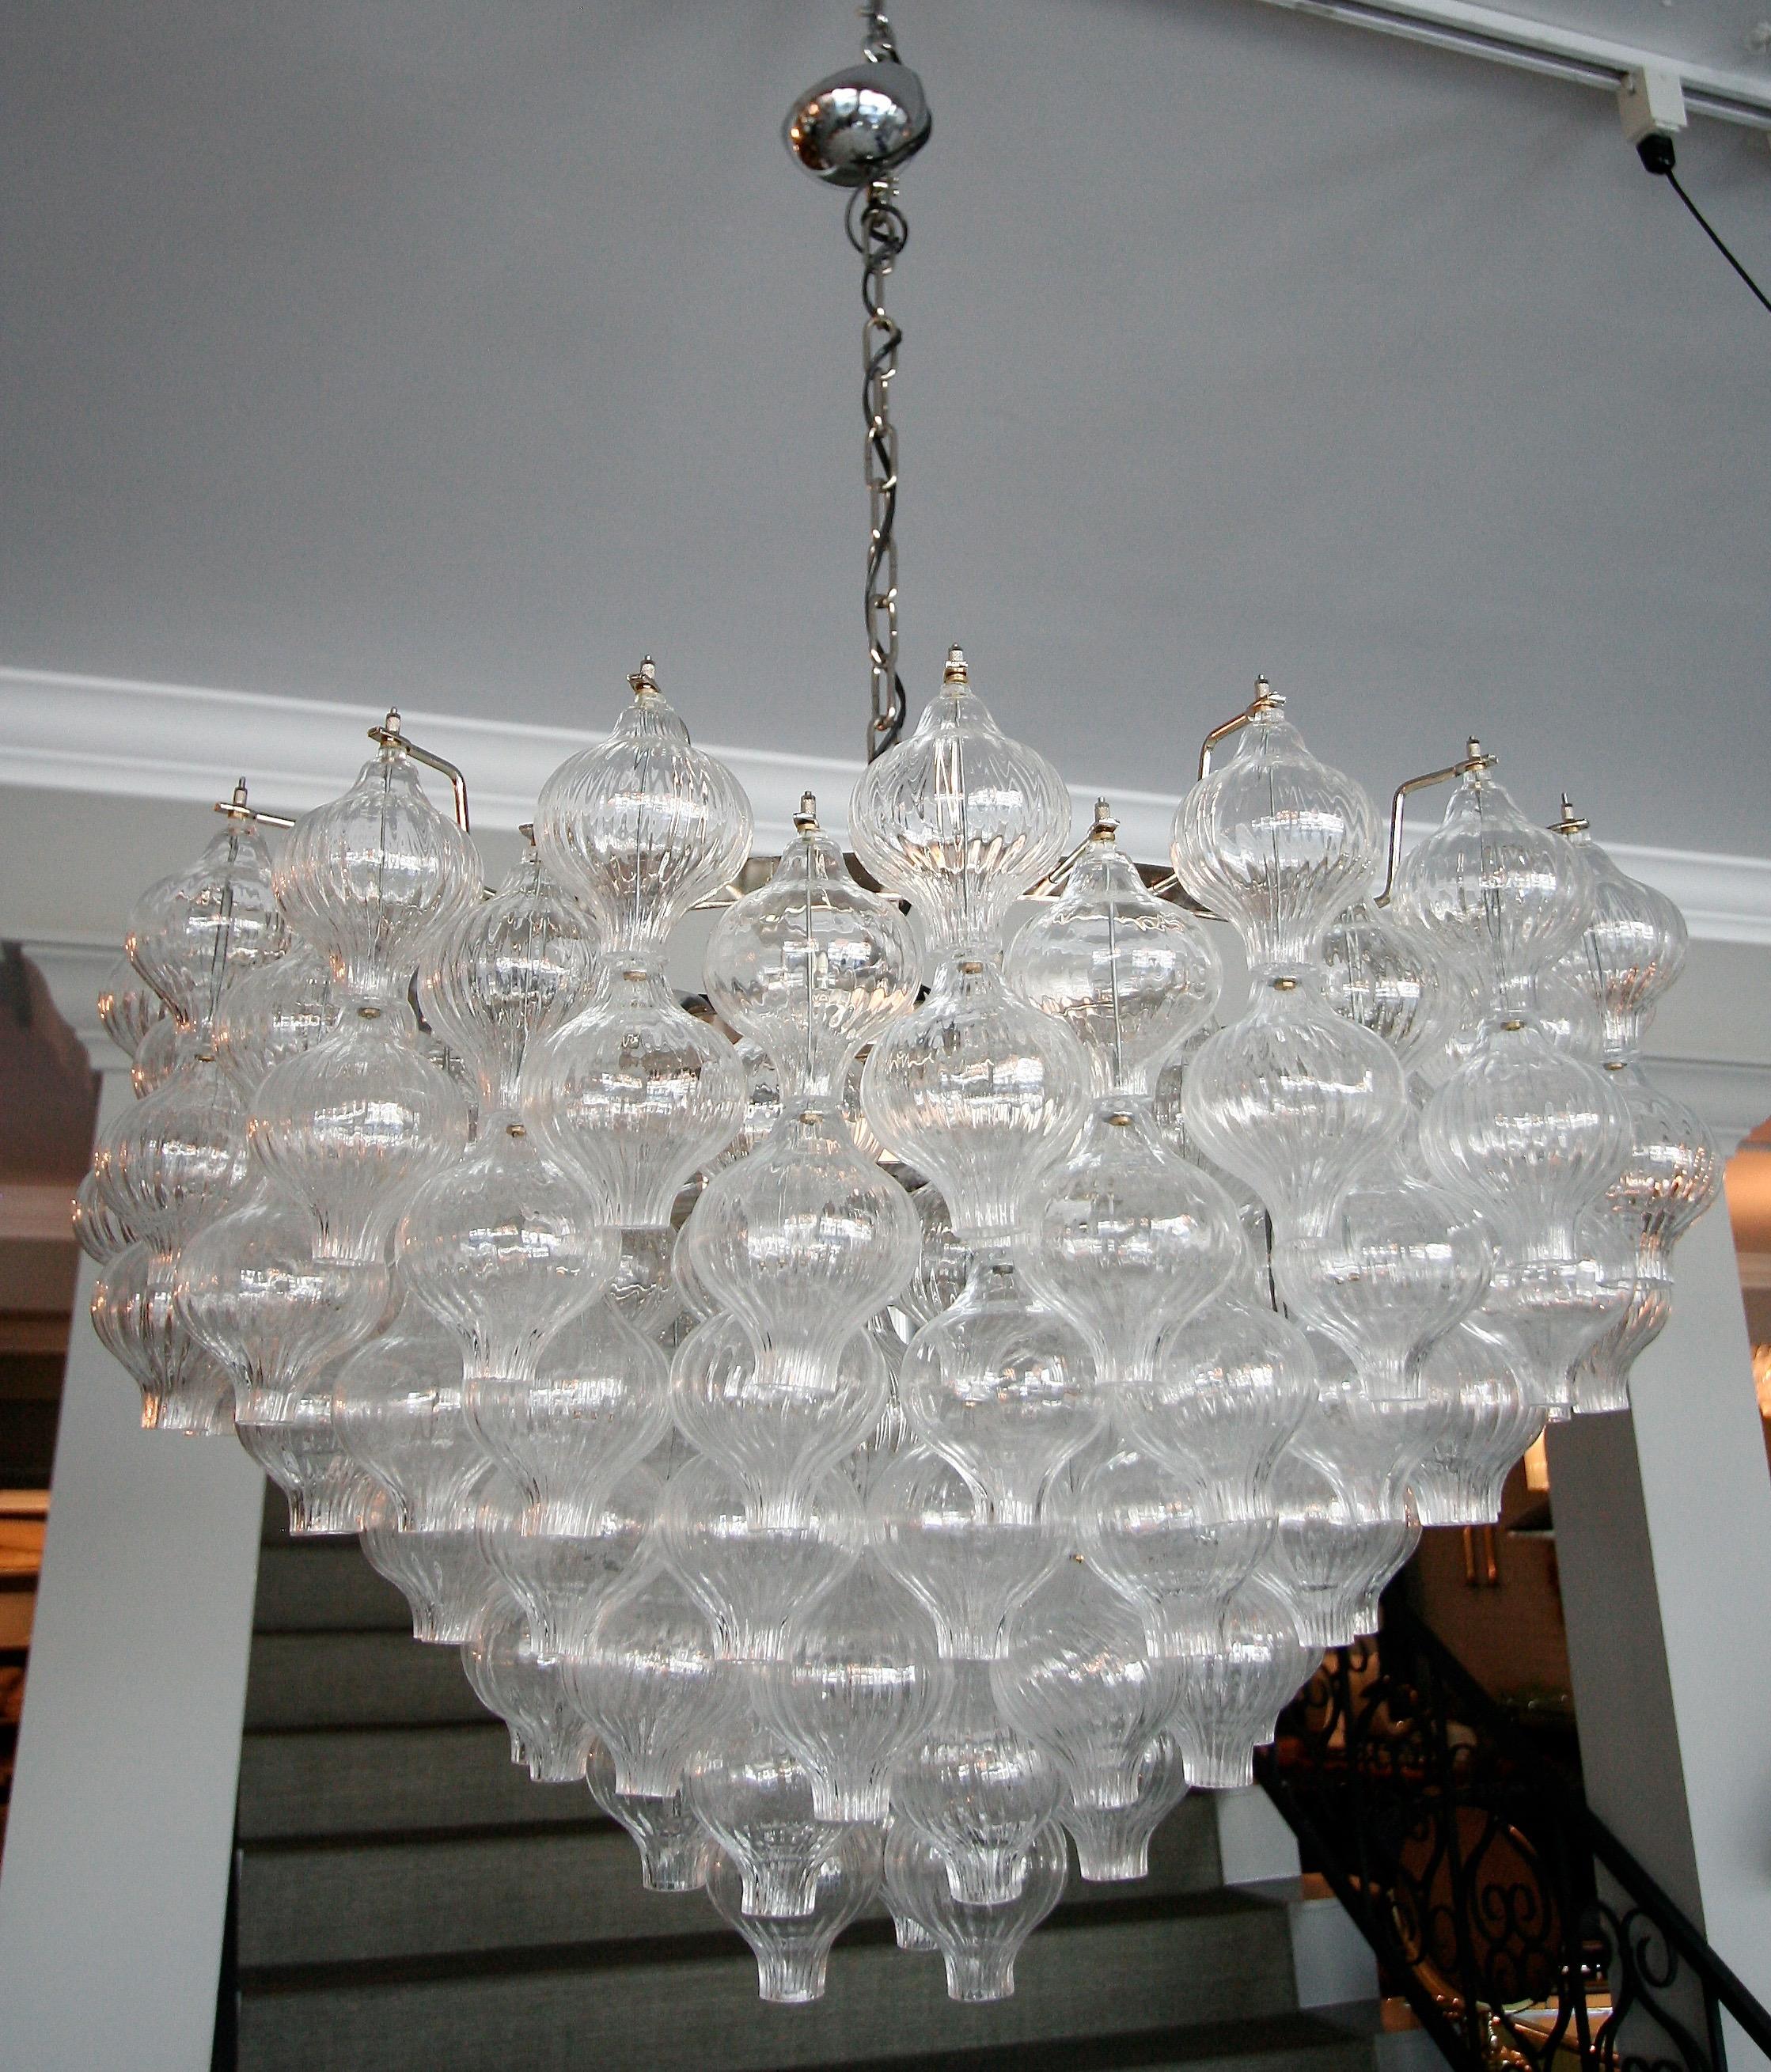 Custom midcentury style Murano clear glass chandelier with 95 double glass tulip shaped balls to make hourglass shapes with chrome frame. Can be done in different metals. Height with canopy 42